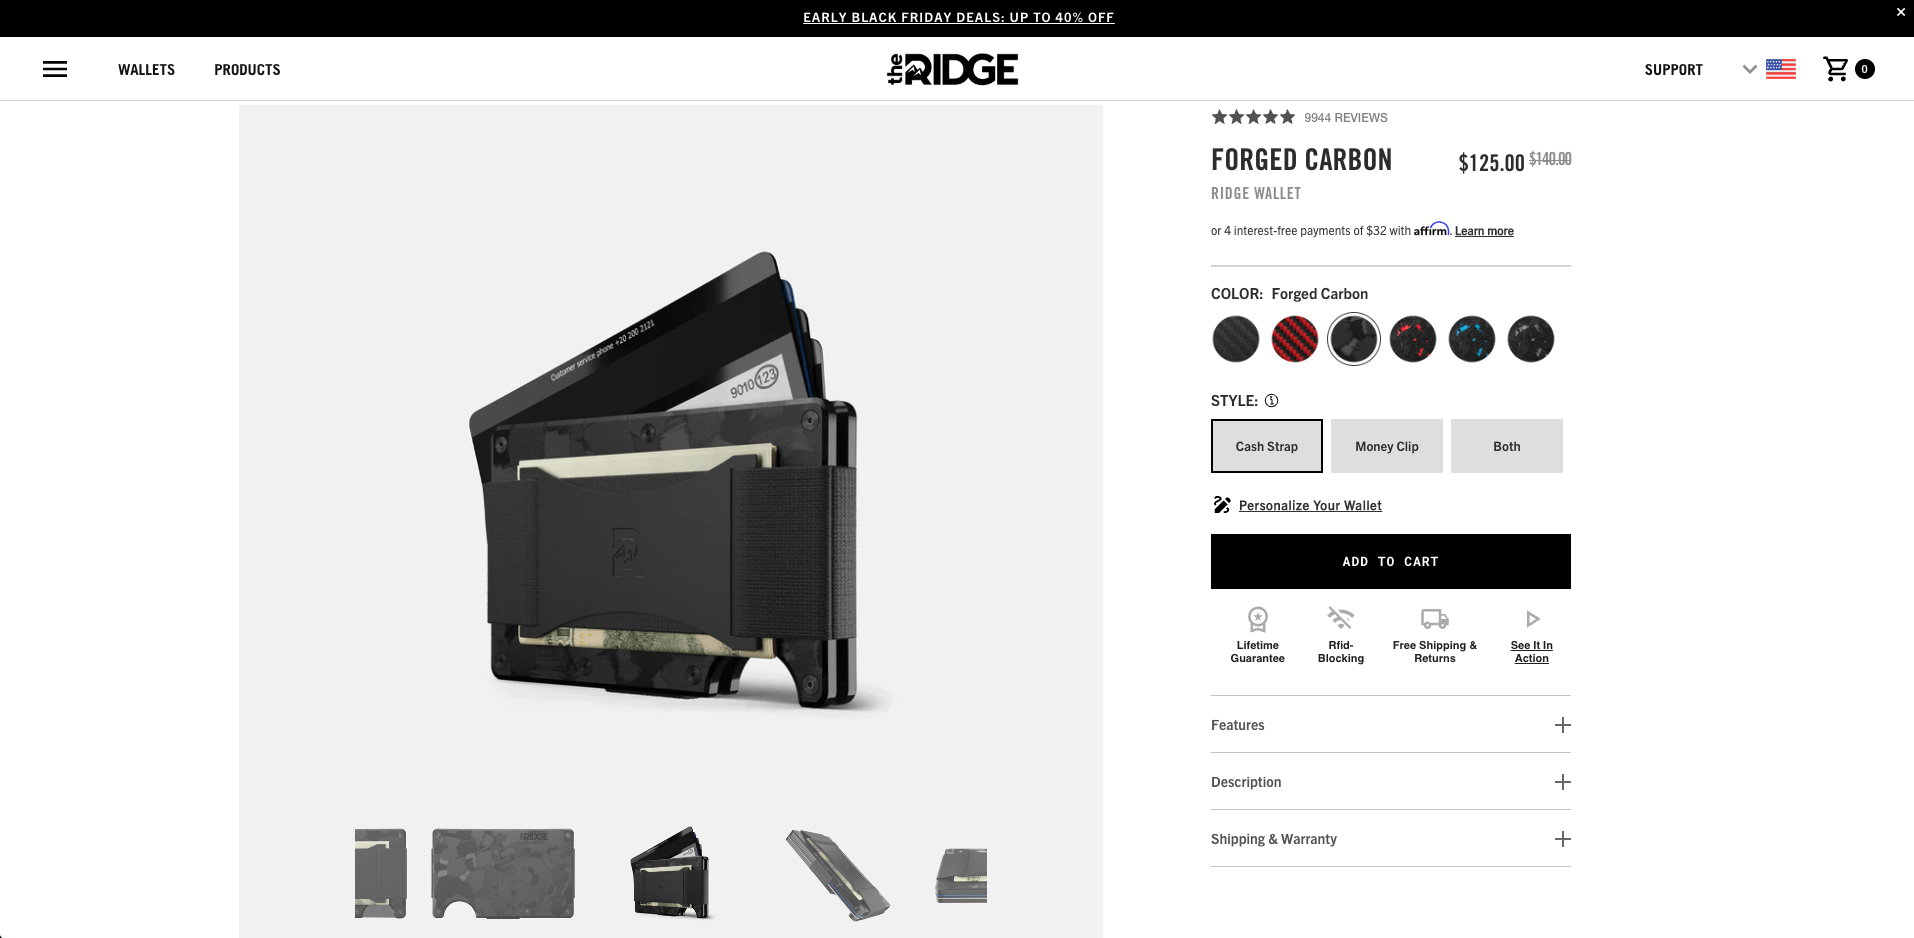 The Ridge Wallet Forged Carbon holiday gift guide